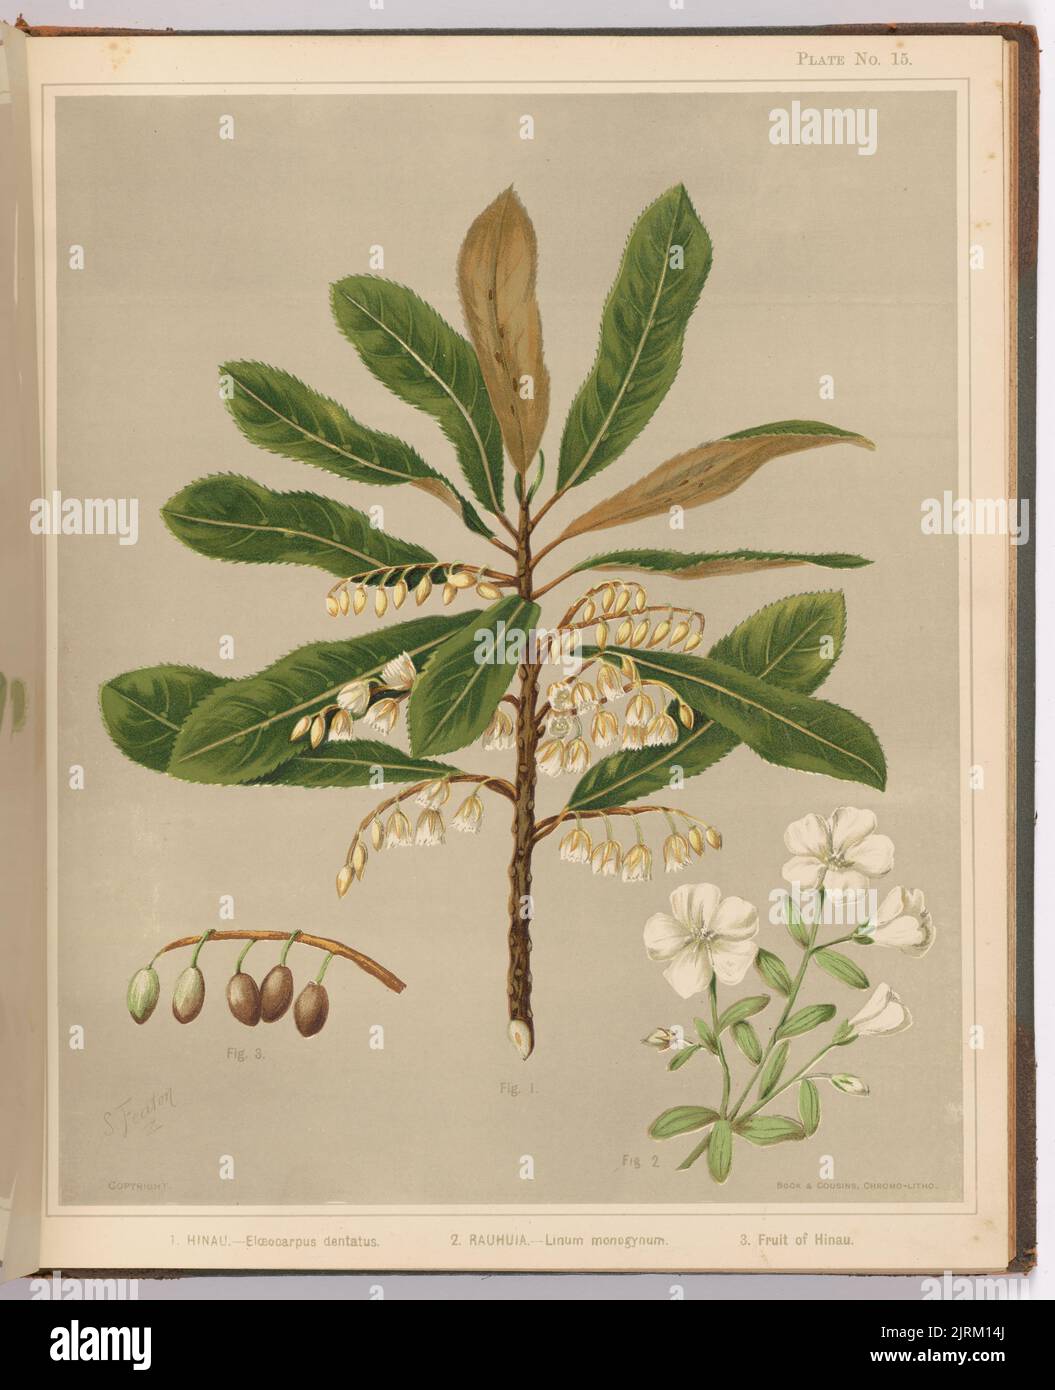 1. Hinau. - Elaeocarpus dentatus. 2. Rauhuia. - Linum monogynum. 3. Fruit of Hinau. Plate 15. From the book: The art album of New Zealand flora : being a systematic and popular description of the native flowering plants of New Zealand and the adjacent islands : volume 1;., 1889, Gisborne, by Sarah Featon, Bock and Cousins. Stock Photo